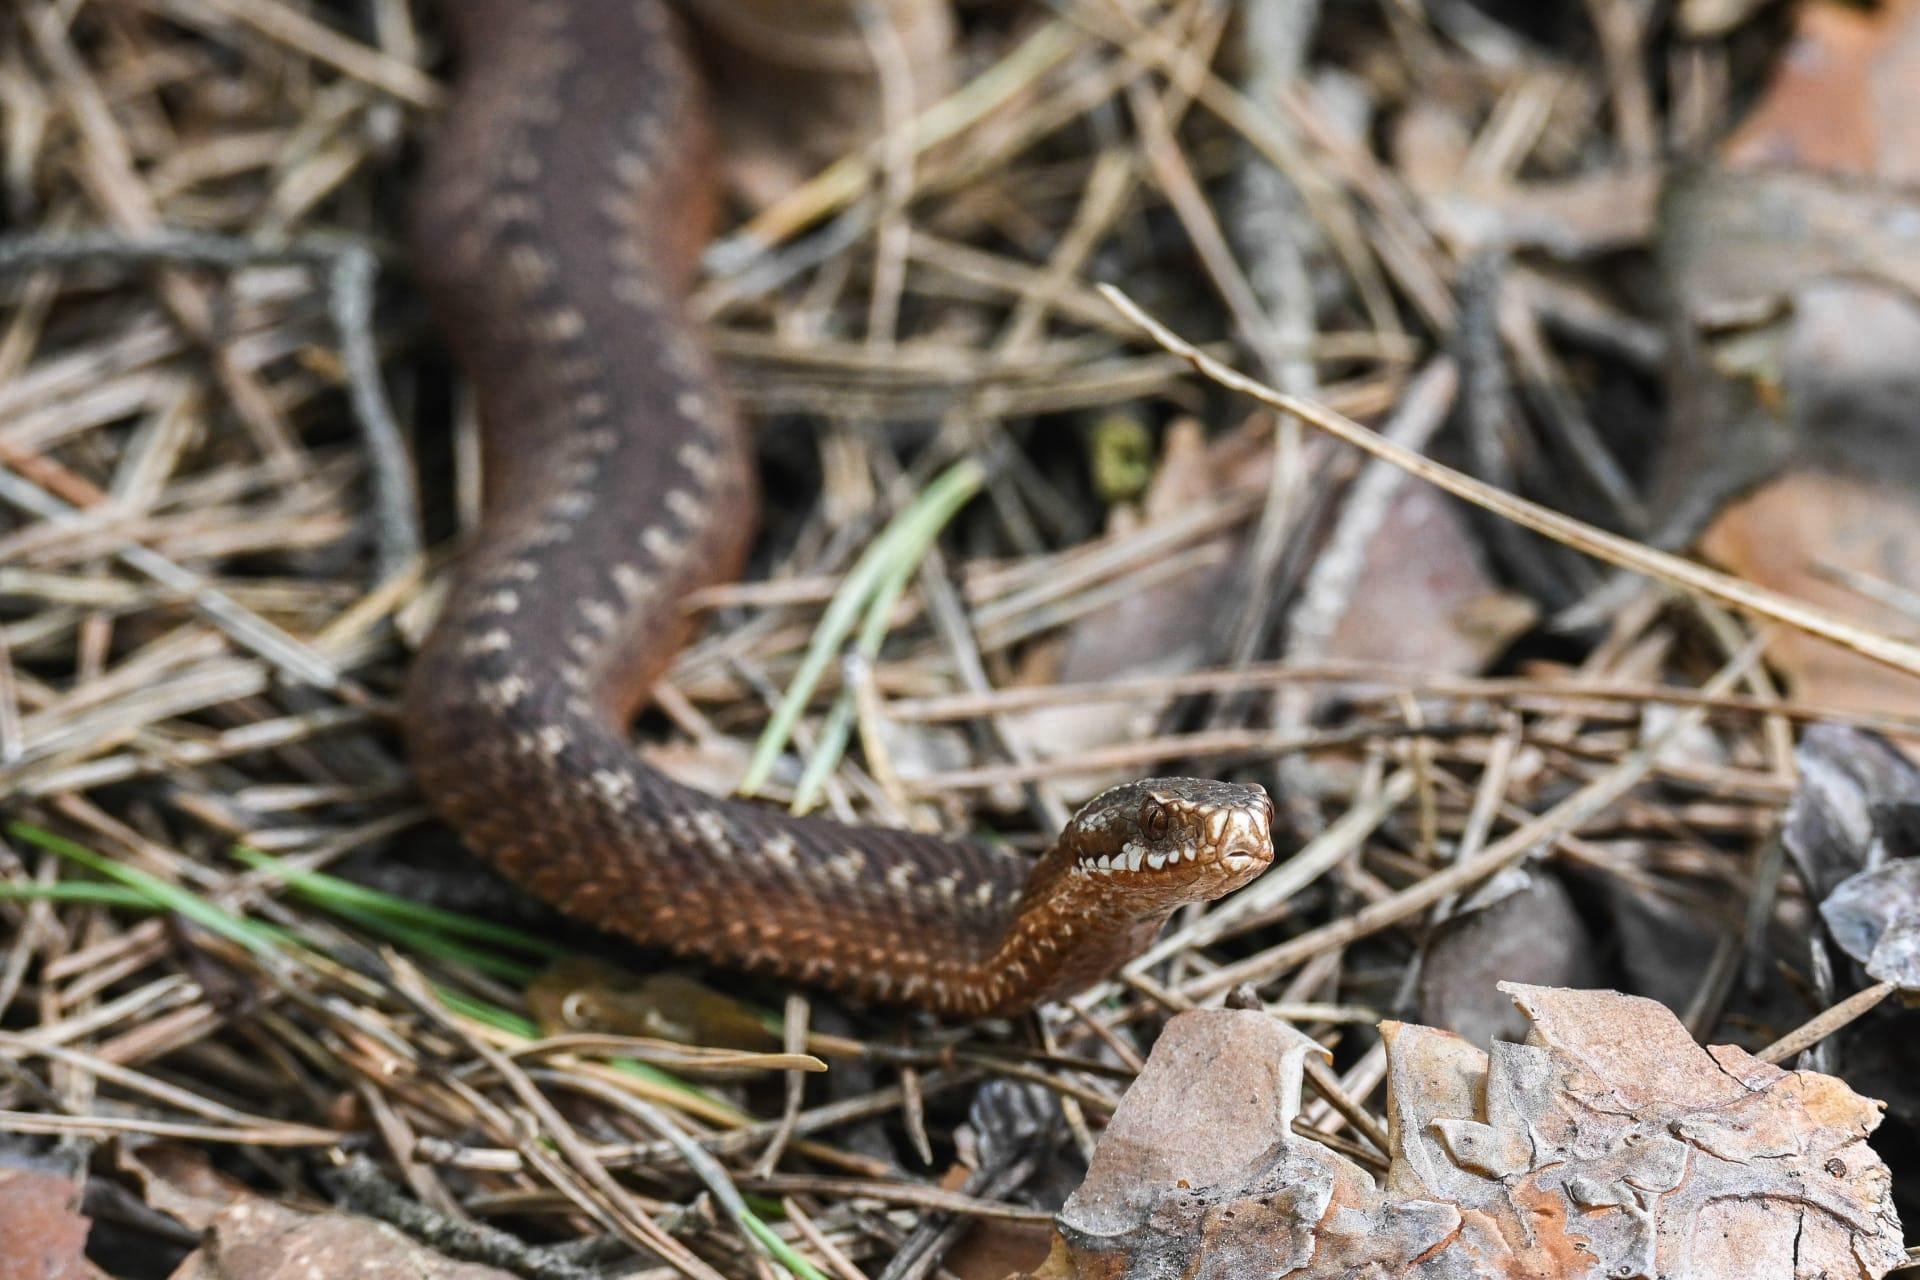 Grass snake pictures